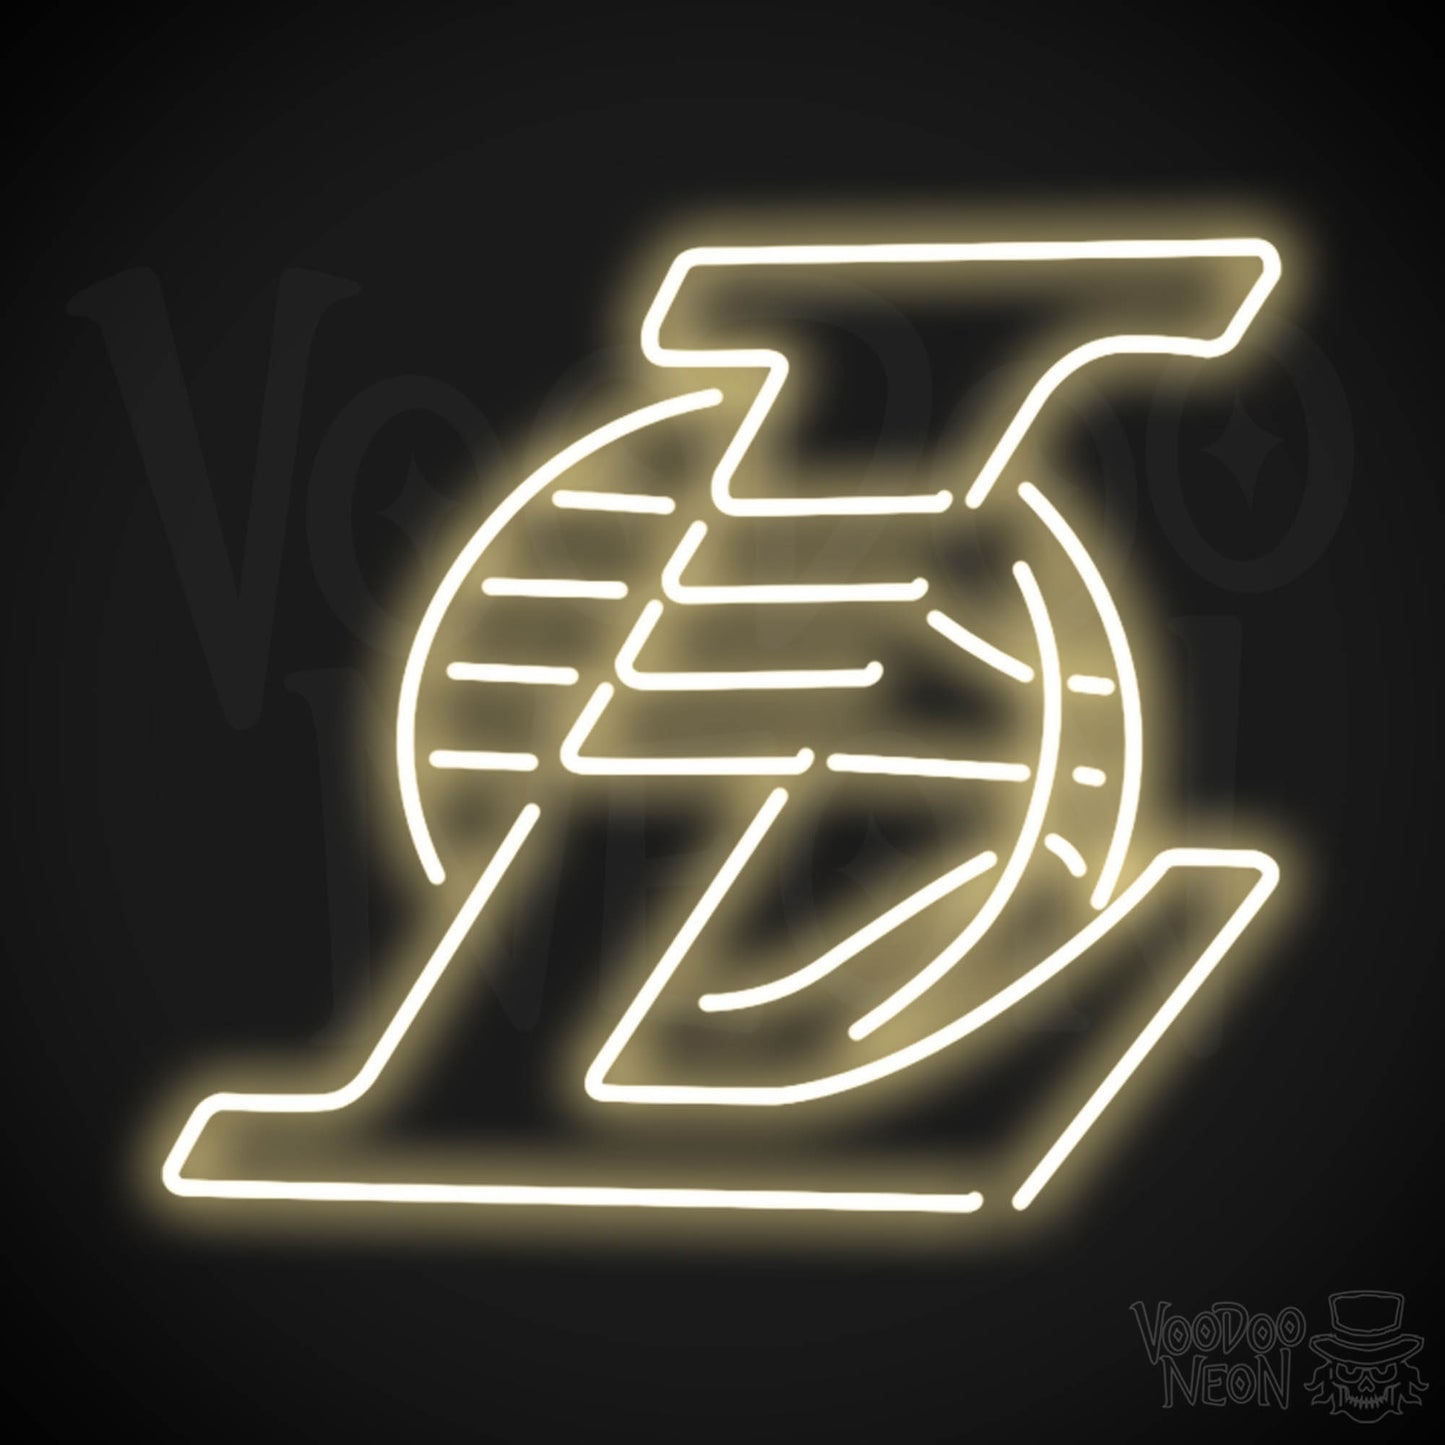 Los Angeles Lakers Neon Sign - Los Angeles Lakers Sign - Neon Lakers Logo Wall Art - Color Warm White